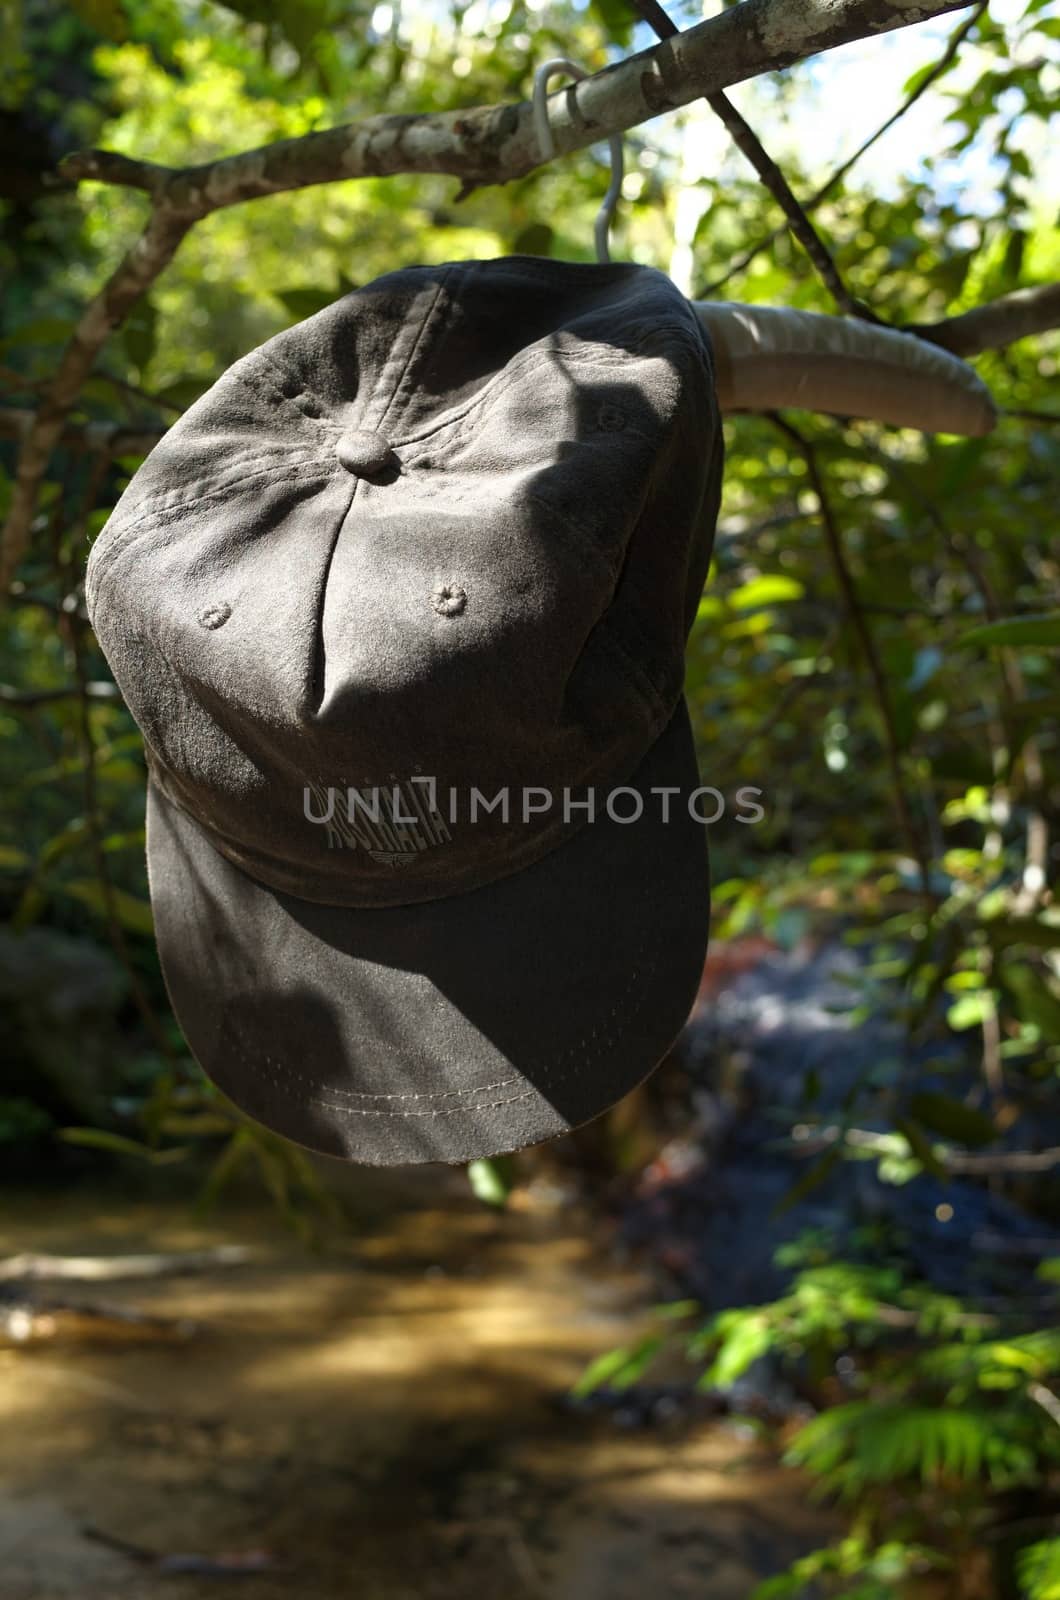 Australia cap hanging from tree branch on clothes hanger  by jaaske